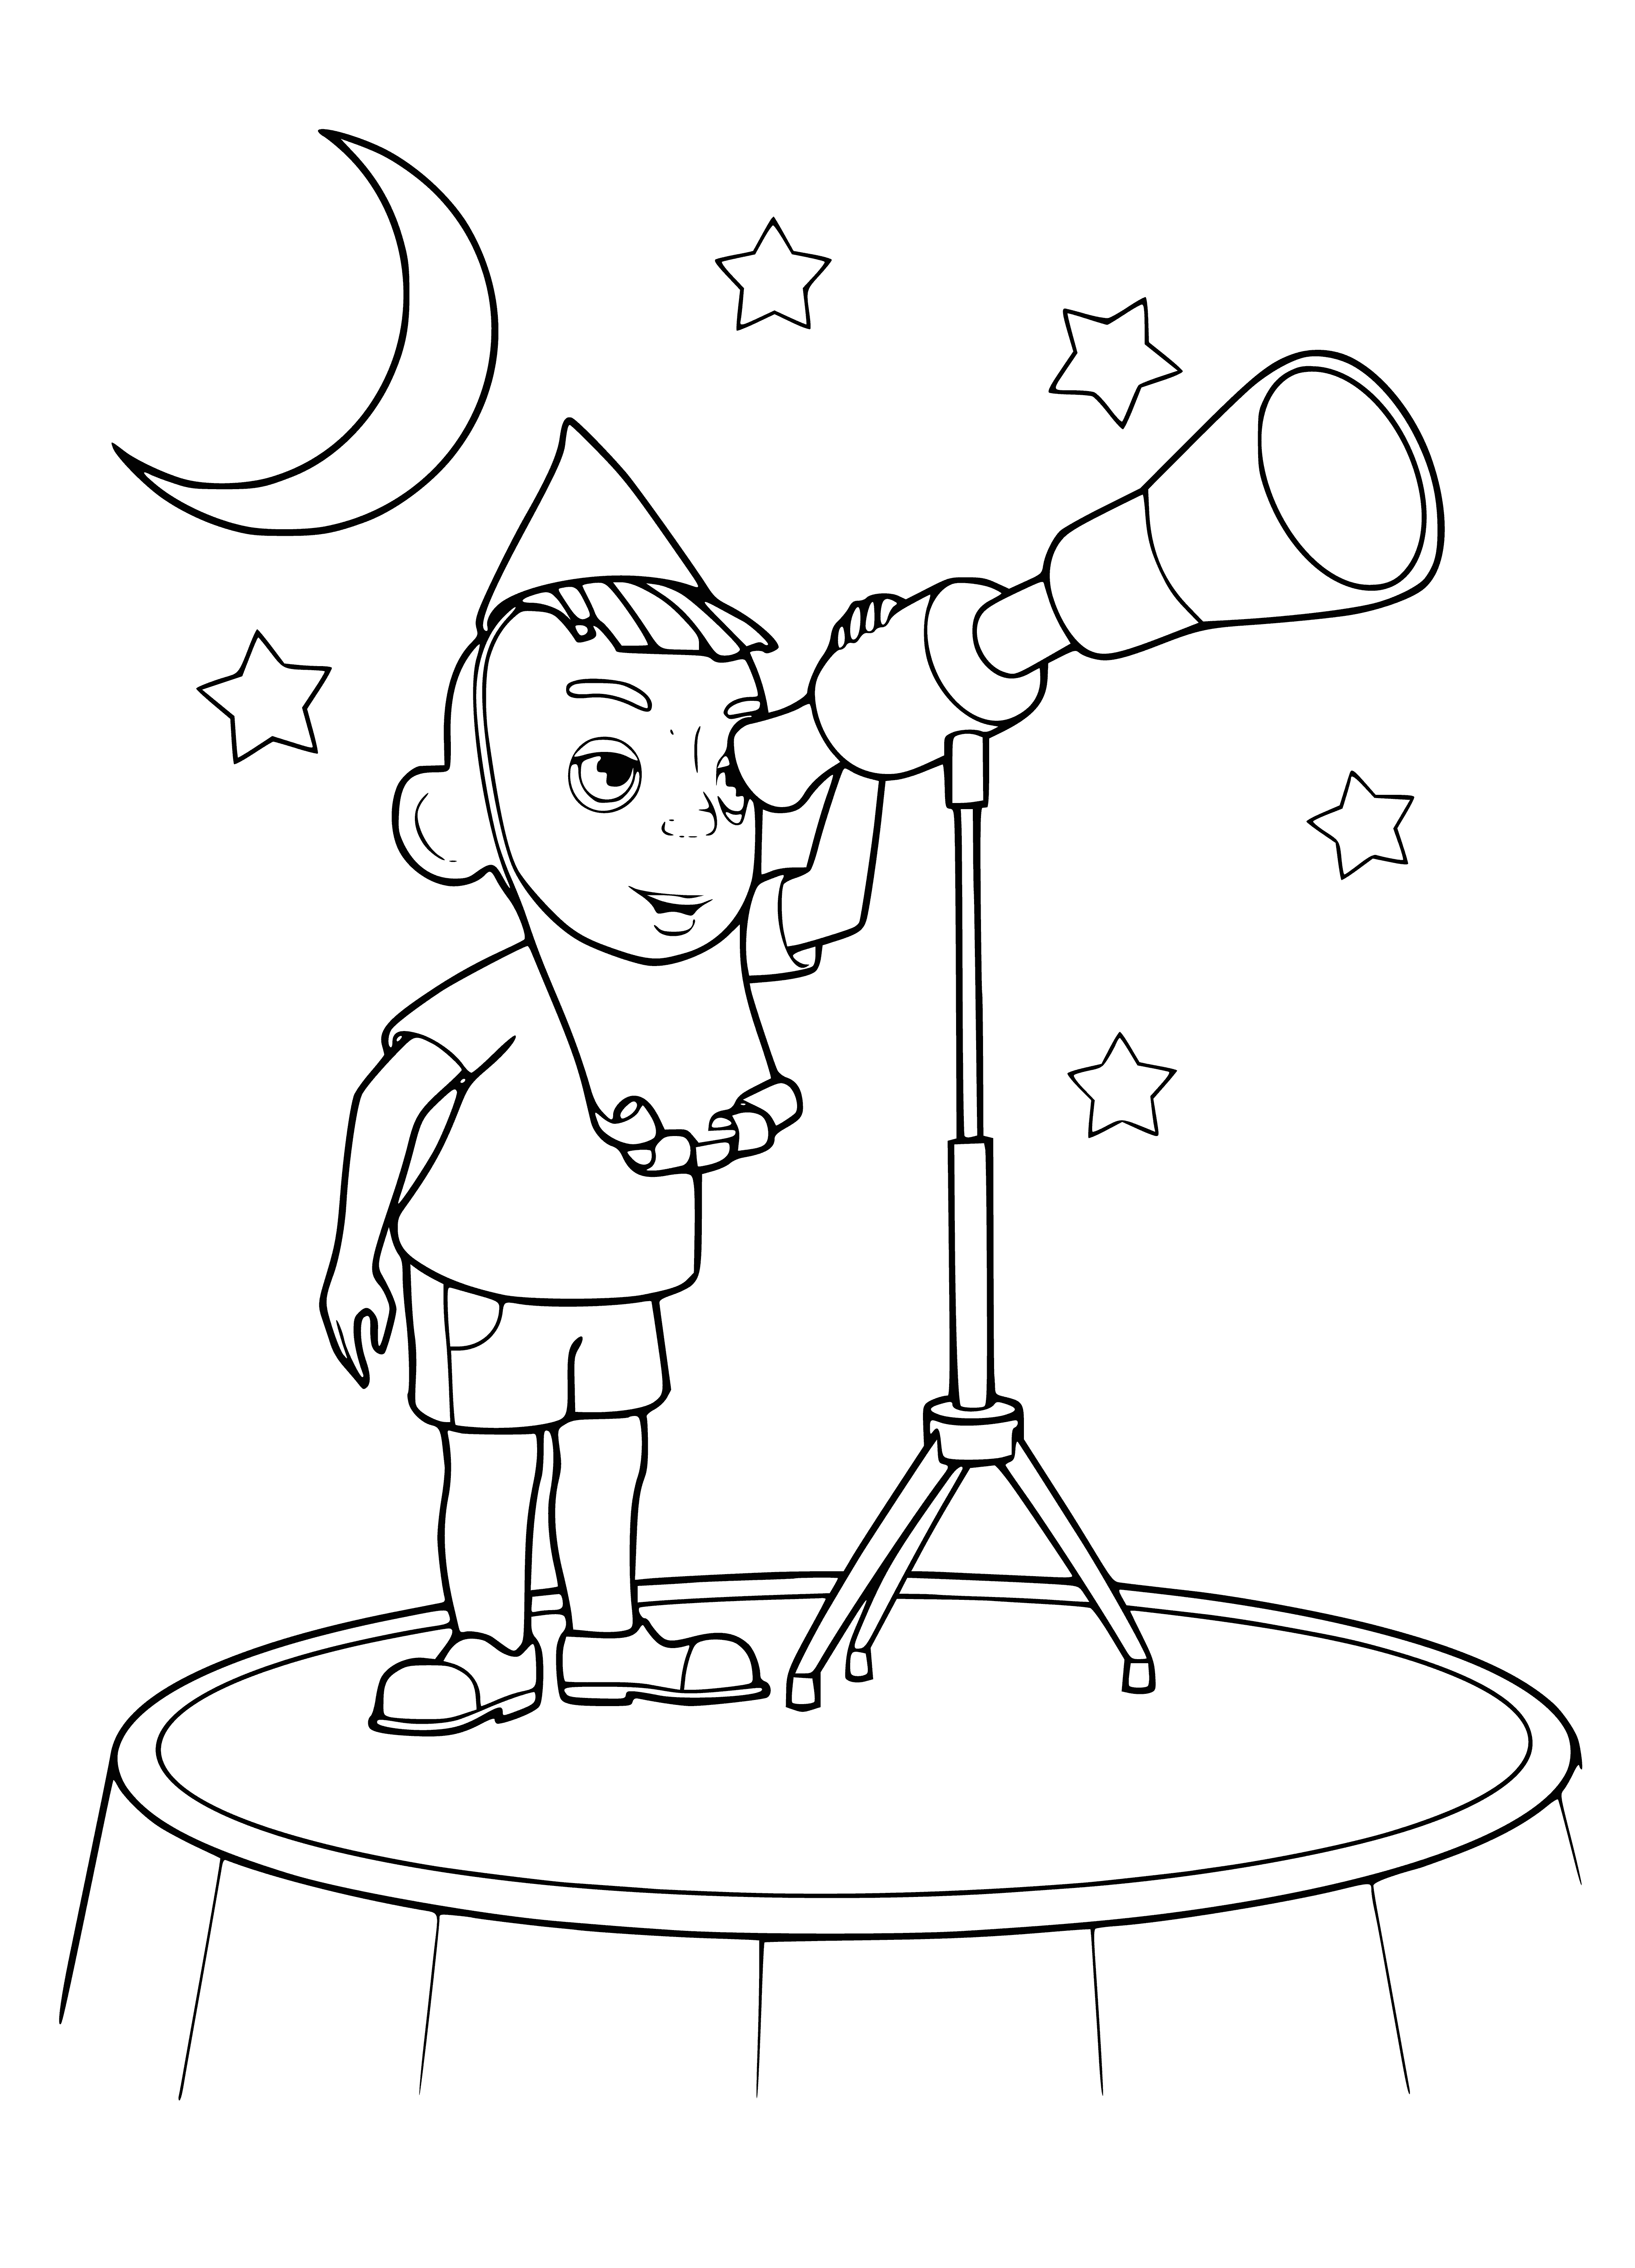 coloring page: Colorful planets & stars with a globe in center; left of globe is a yellow planet surrounded by green rings & on right is a red planet with white moon.